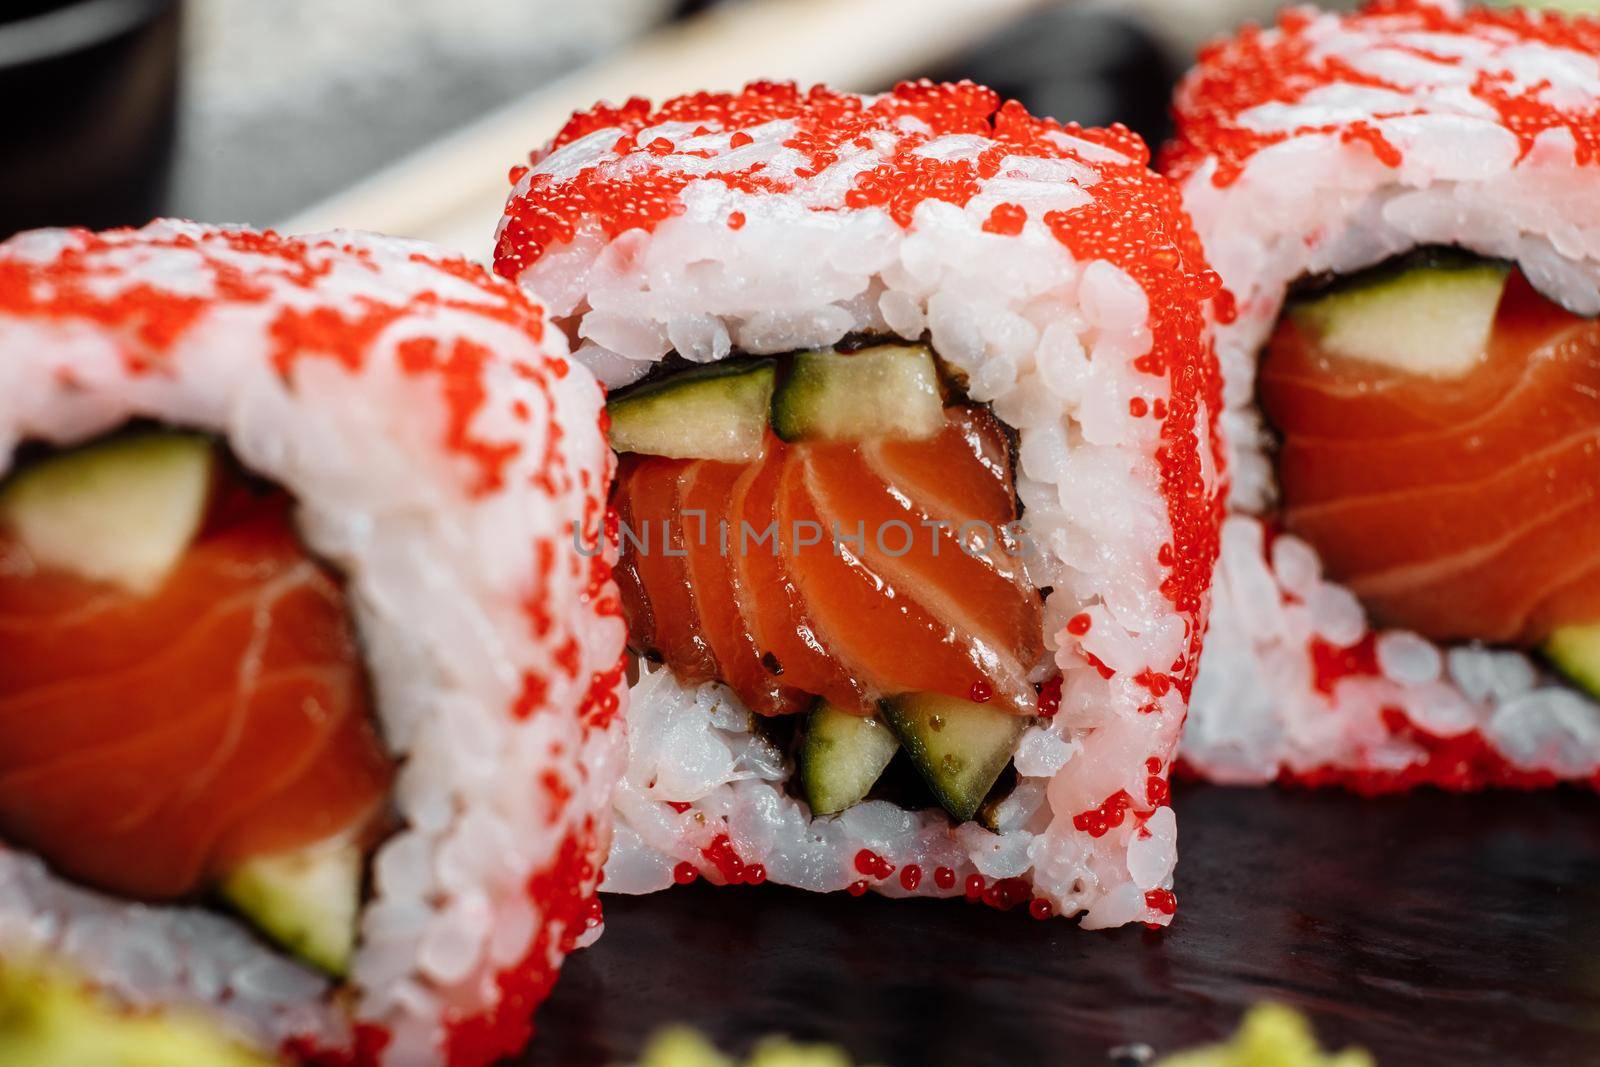 California sushi style rolls, with raw vegetables, food border background by UcheaD